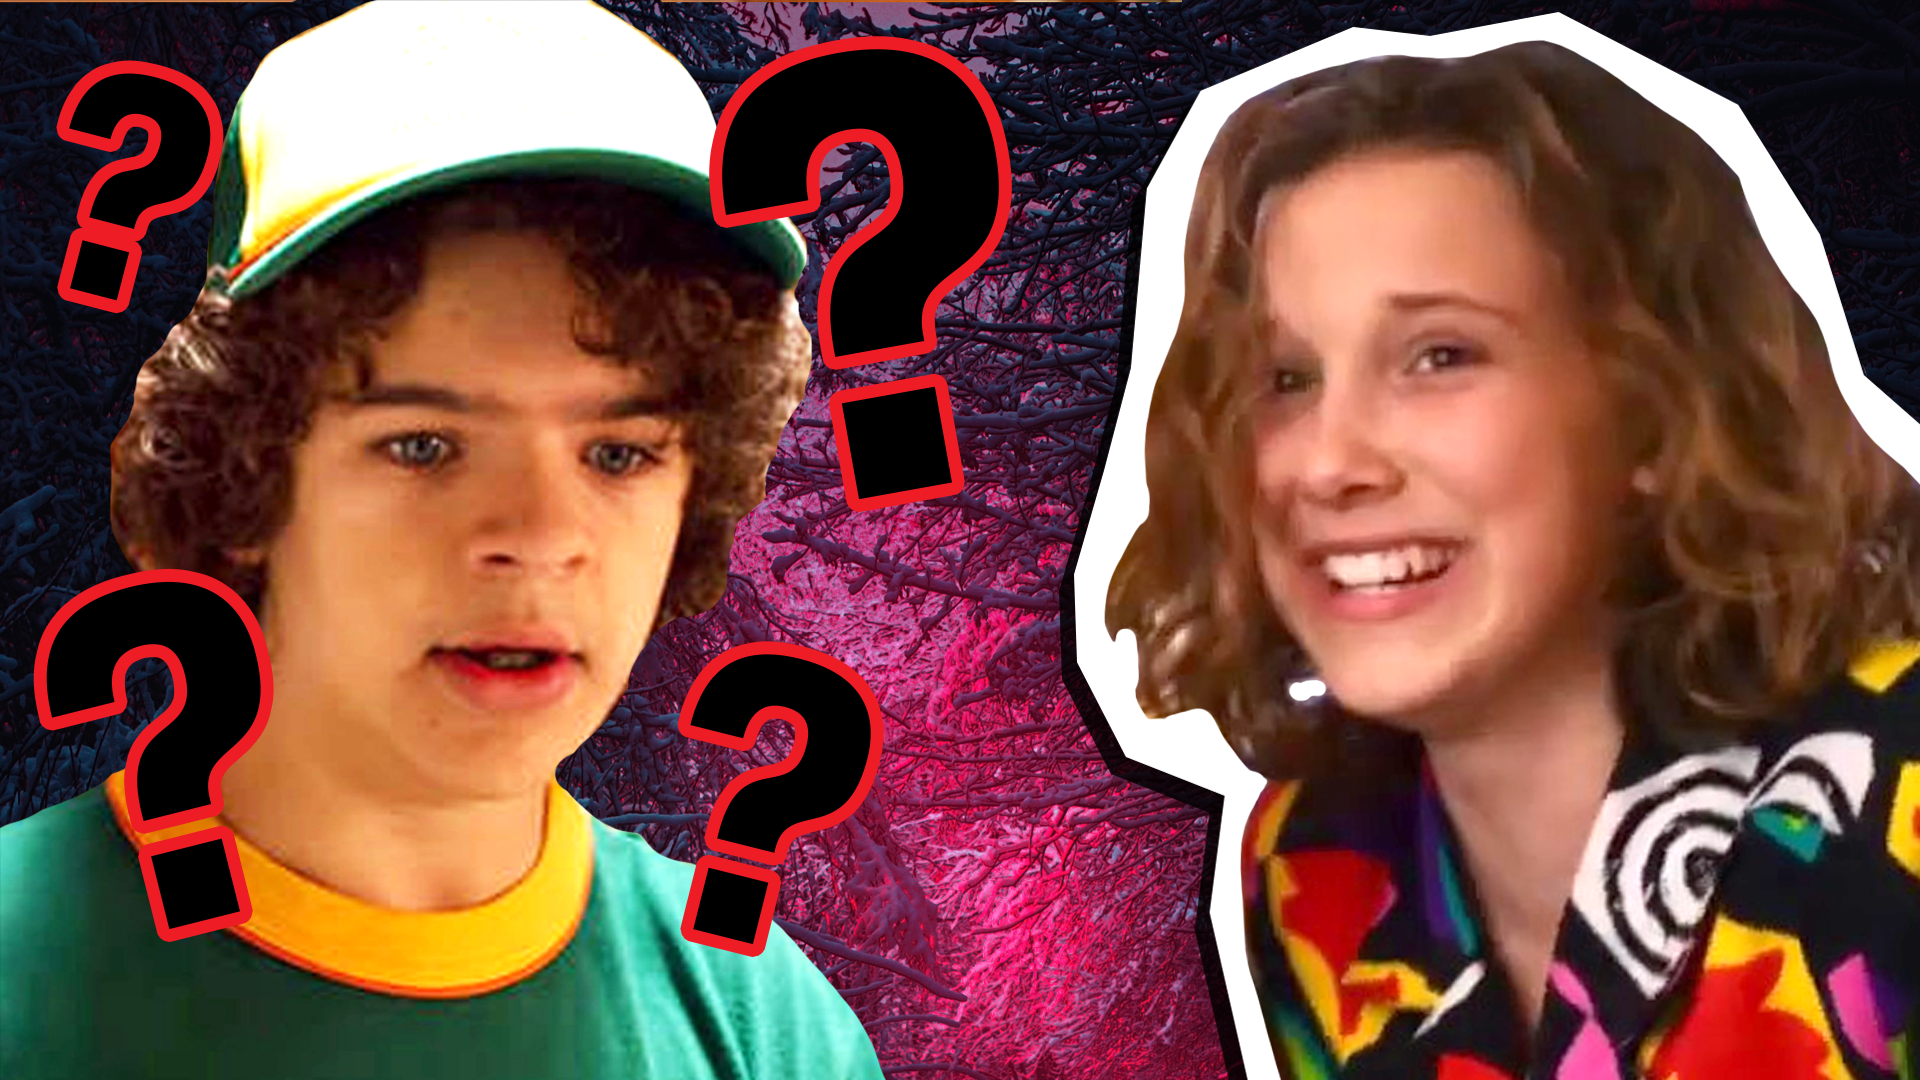 Dustin and Eleven from Stranger Things surrounded by question marks in a horror forest